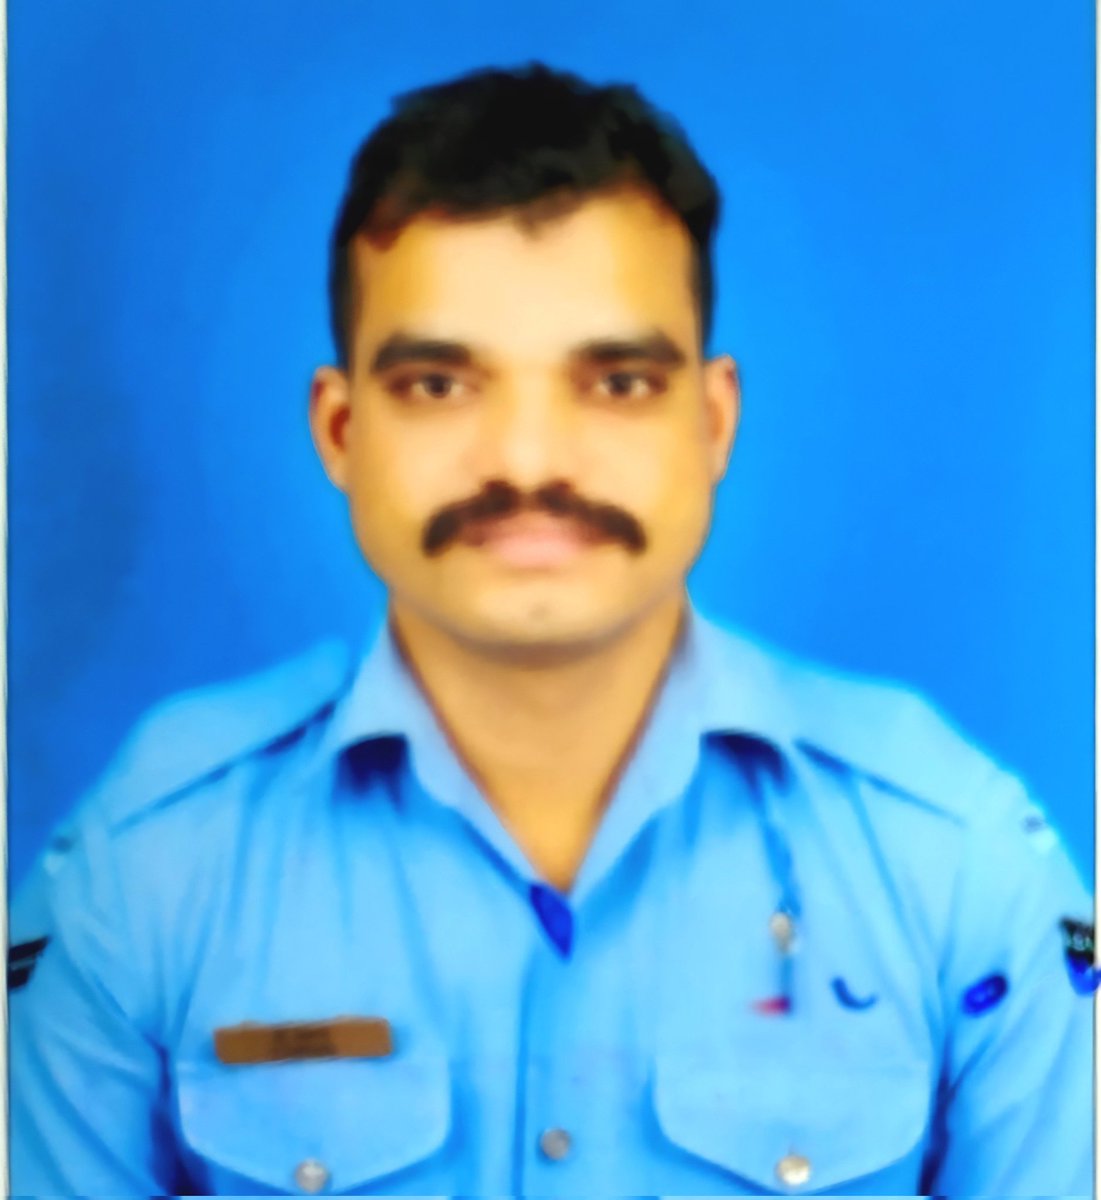 Bad News!! India lost Braveheart Corporal Vicky Pahade (Indian Air Force) He made supreme sacrifice in #Poonch terrorist attack yesterday. He hailed from Chhindwara, Madhya Pradesh (NOK informed) Salute 🇮🇳 #IndianAirForce #PoonchAttack #TerrorAttack